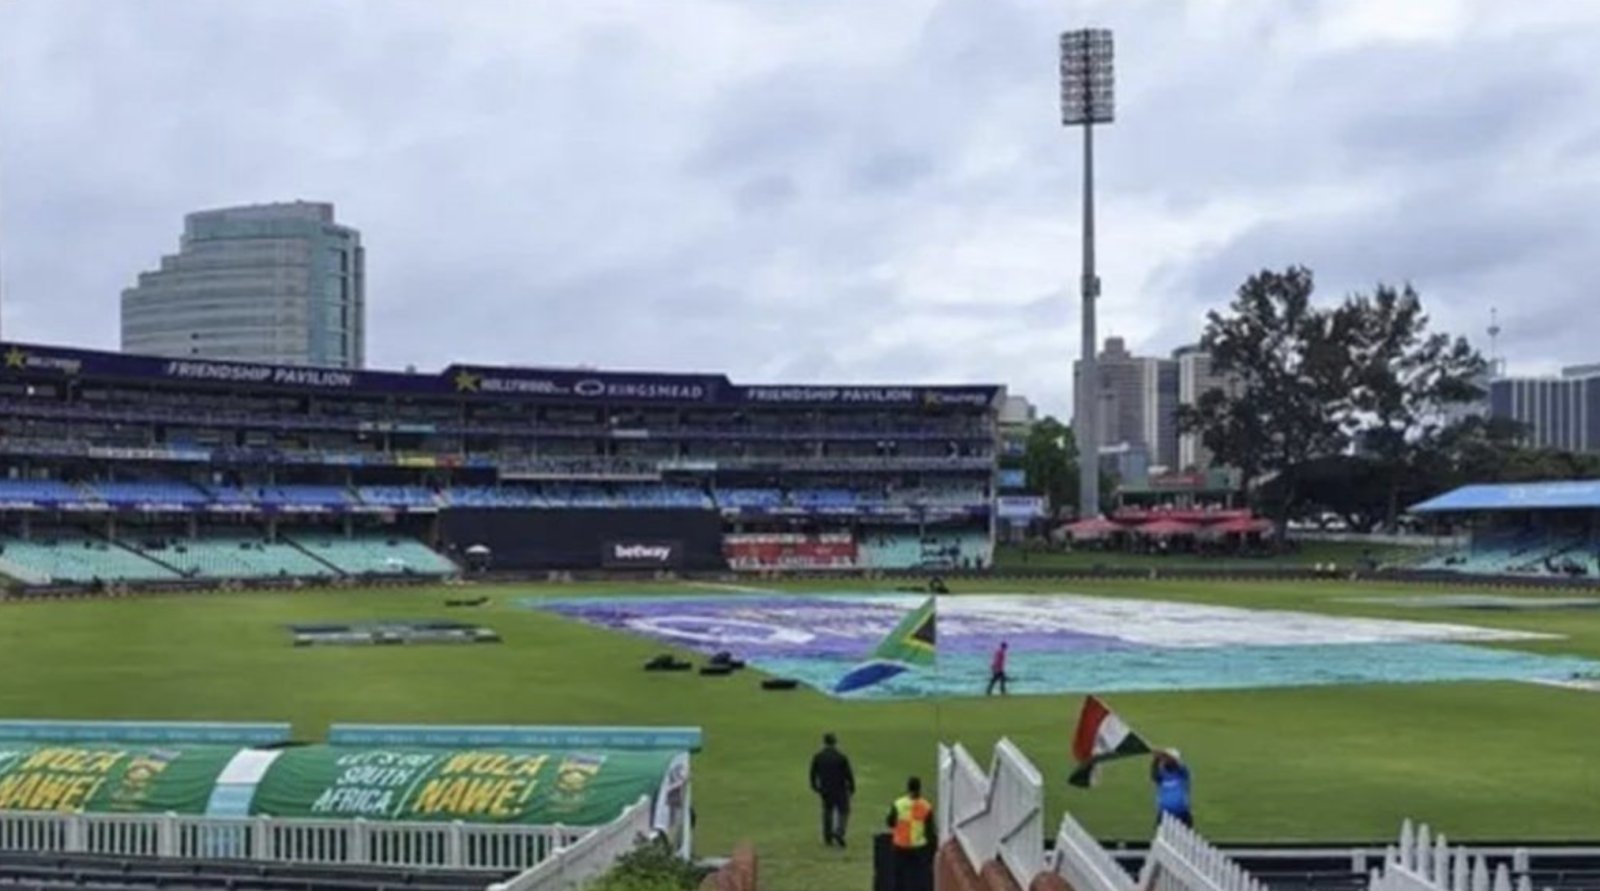 IND vs SA: Will India-South Africa's second T20 also be affected by rain, big update regarding weather